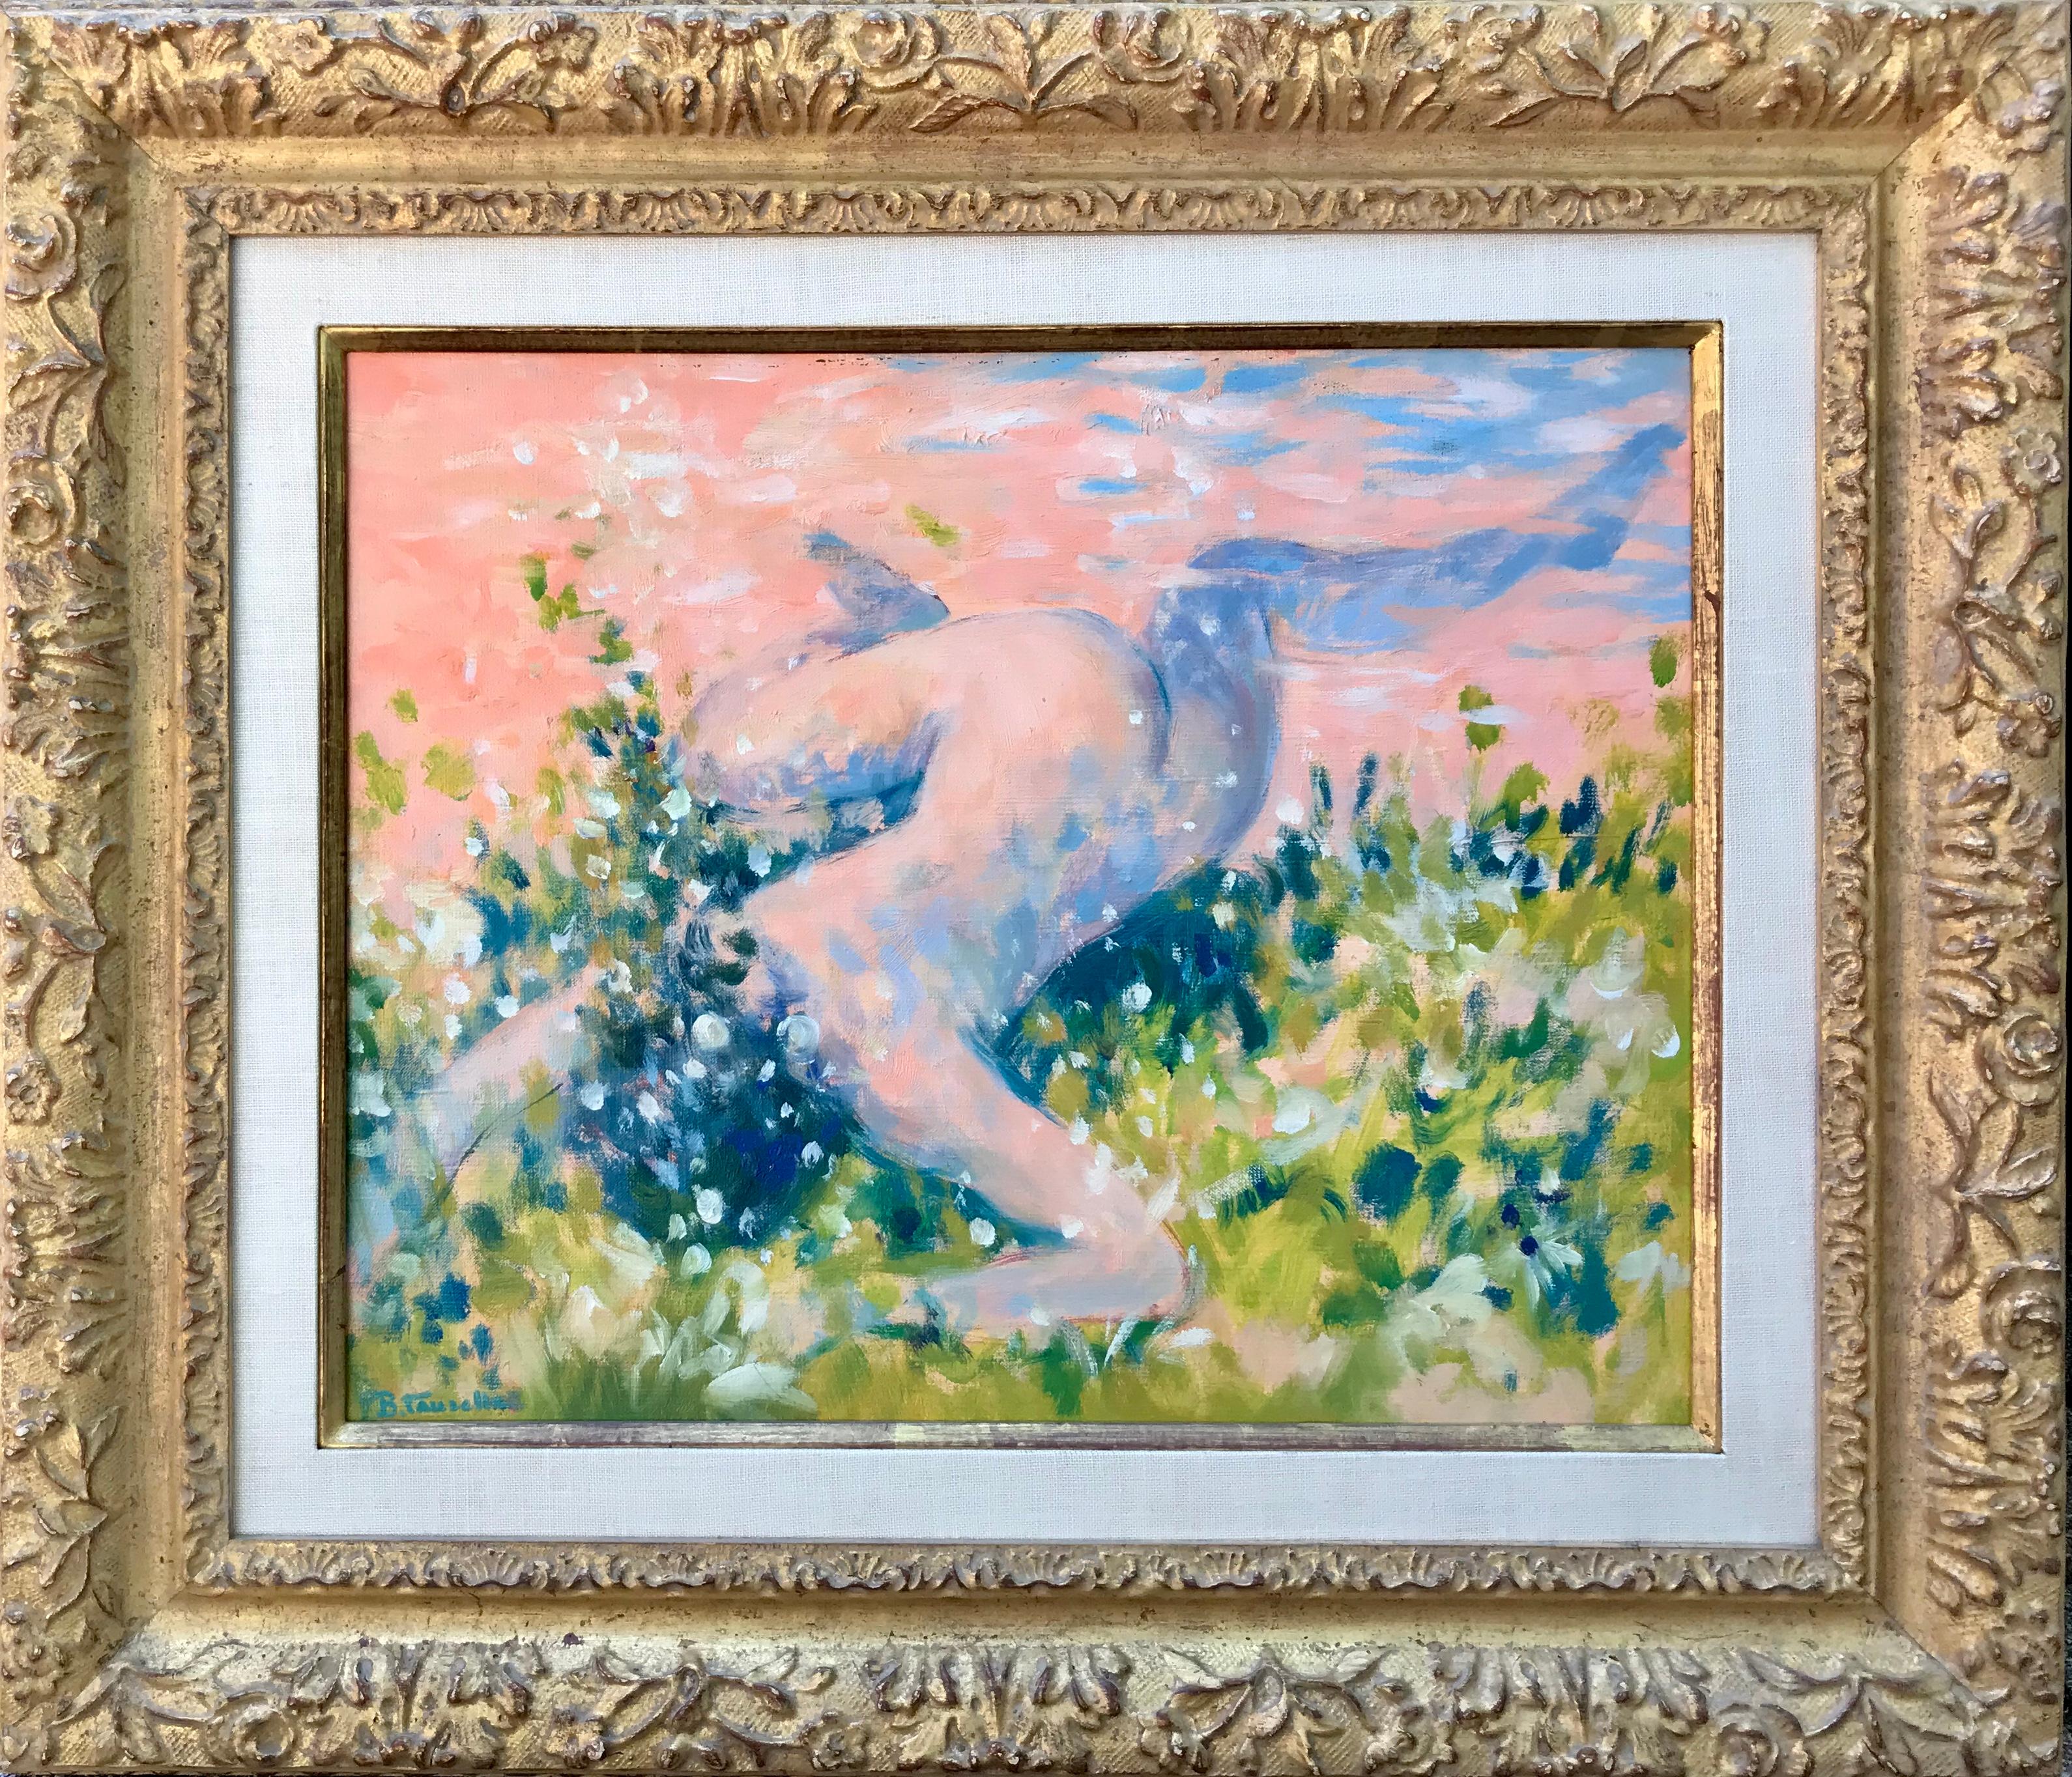 Oil on canvas painting by the French artist, Bernard Taurelle.  Signed lower left and titled verso.  Dated 1975.  Condition:  Excellent.   In fine gilded frame 20.50'' x 23.50 inches.   Felix Vercel Gallery label affixed verso.

Bernard Taurelle was